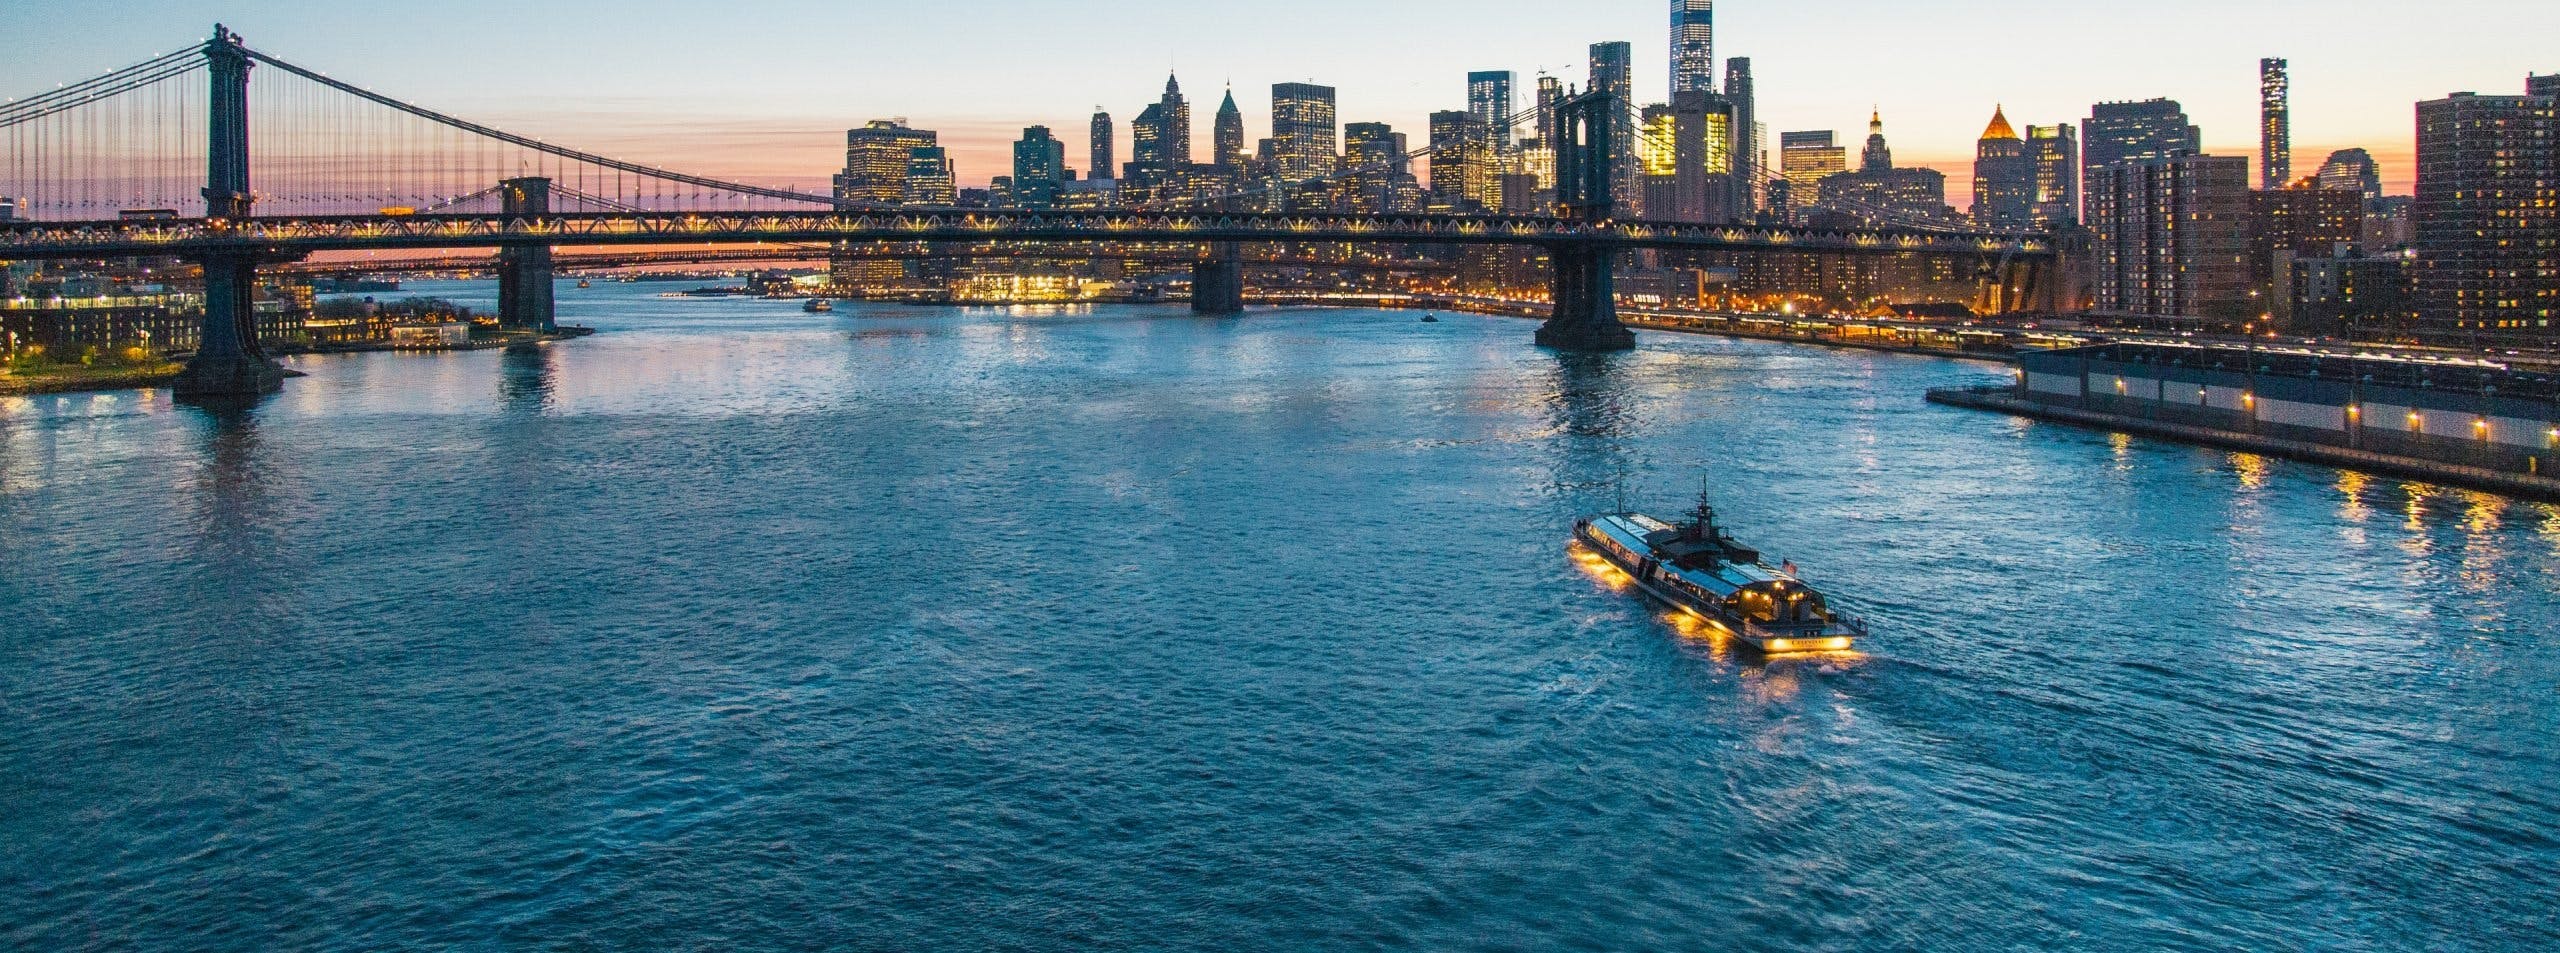 This image showcases a serene evening scene with a private boat gracefully cruising on the water, with the majestic New York City skyline and the illuminated Brooklyn Bridge in the background. It captures the essence of an exclusive Manhattan boat cruise experience, offering a tranquil escape from the bustling city life while presenting an enchanting view of the urban landscape as day turns to night.